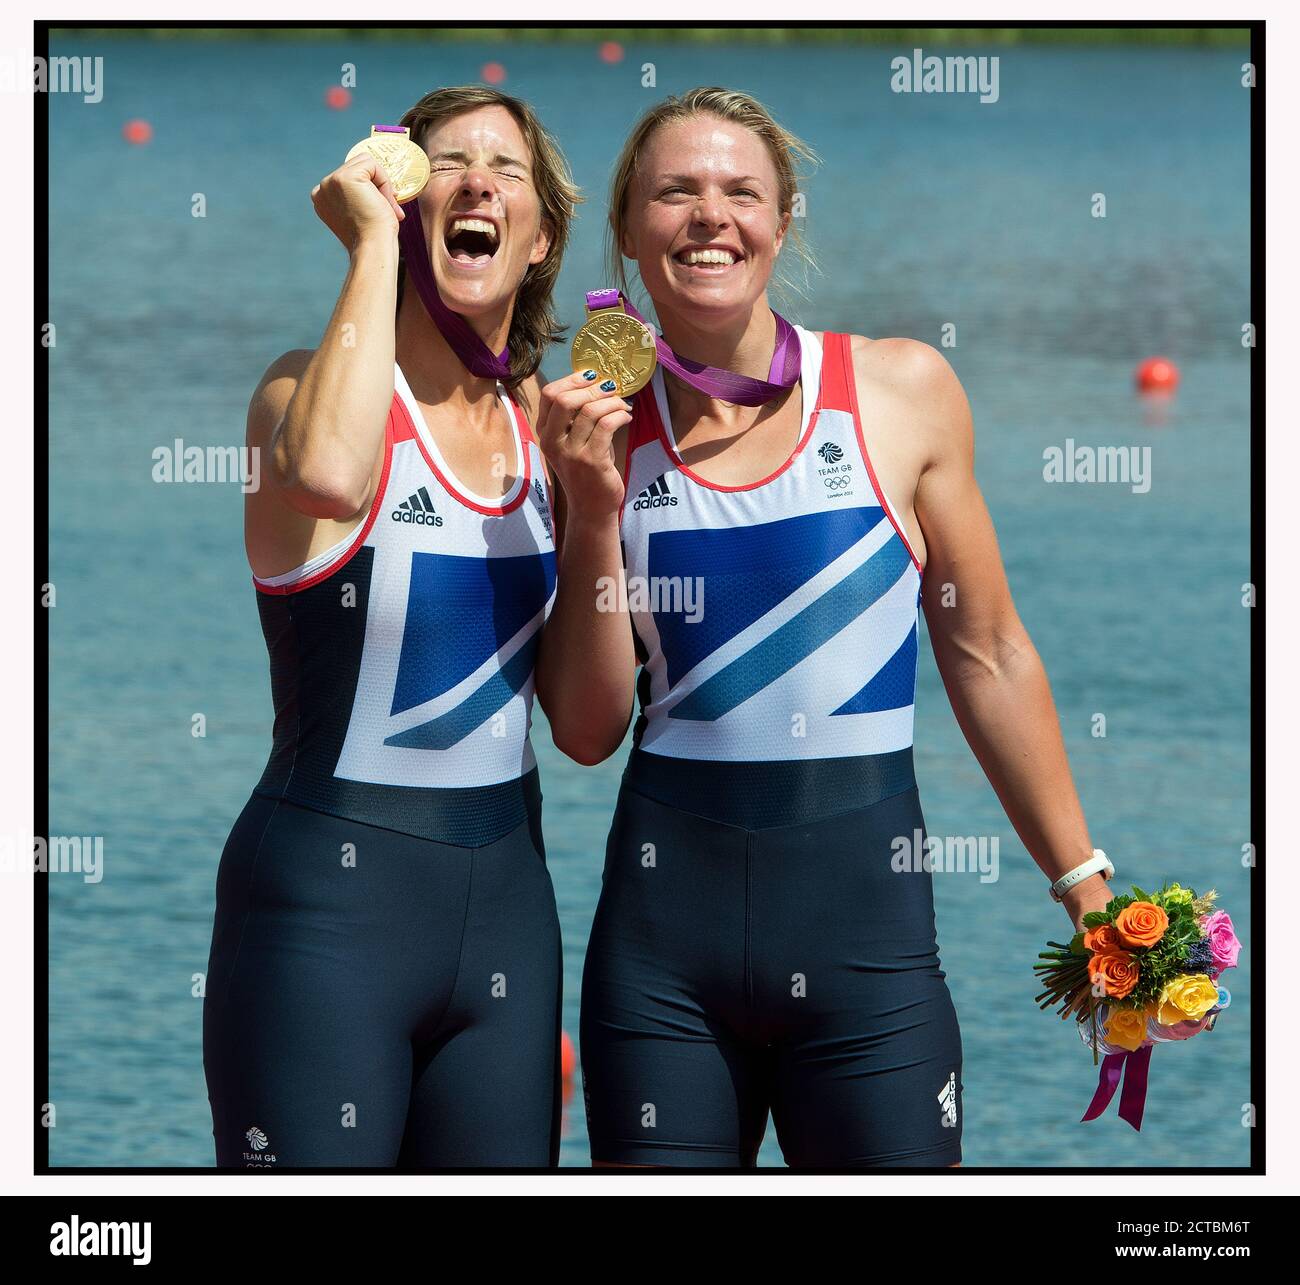 KATHERINE GRAINGER AND ANNA WATKINS CELEBRATE WINNING THE GOLD MEDAL IN THE WOMEN'S DOUBLE SCULLS LONDON OLYMPICS 2012  PICTURE : © MARK PAIN / ALAMY Stock Photo